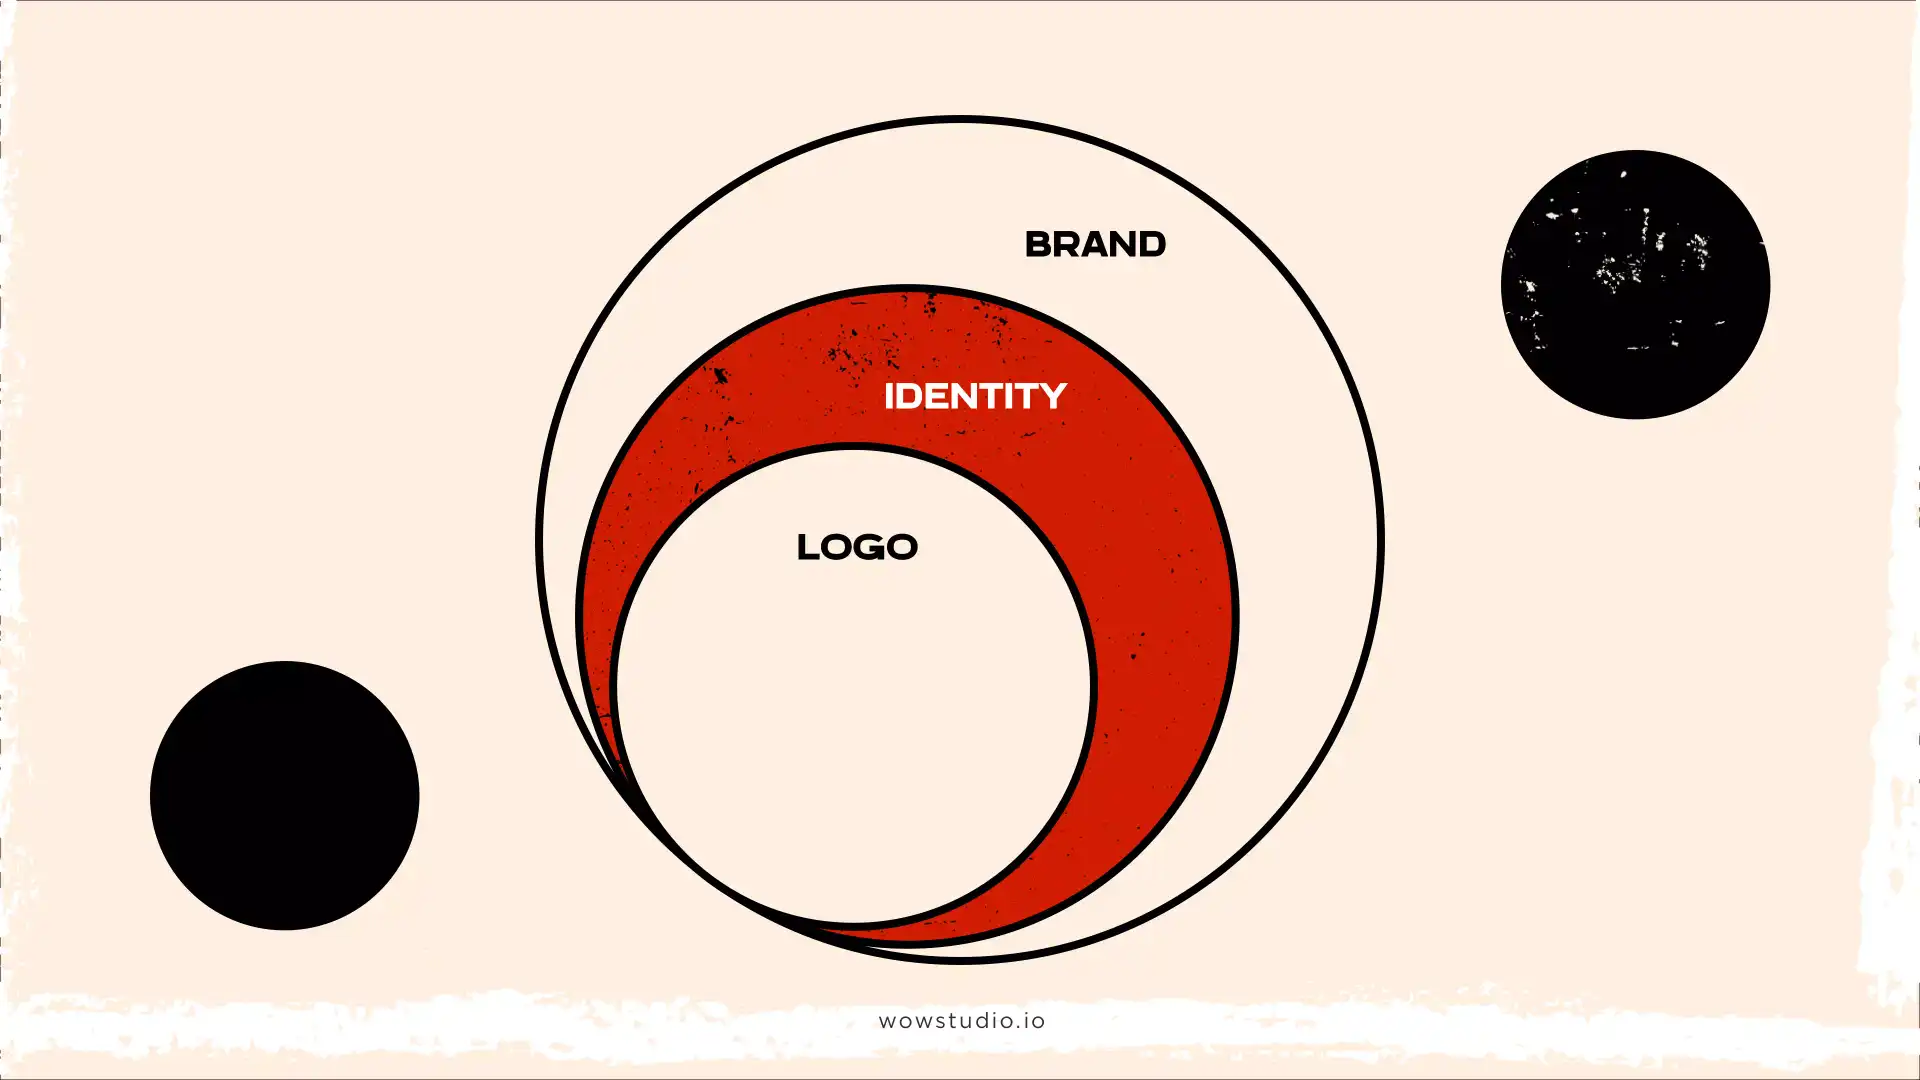 Why is Brand Identity is crucial for a business’ success?